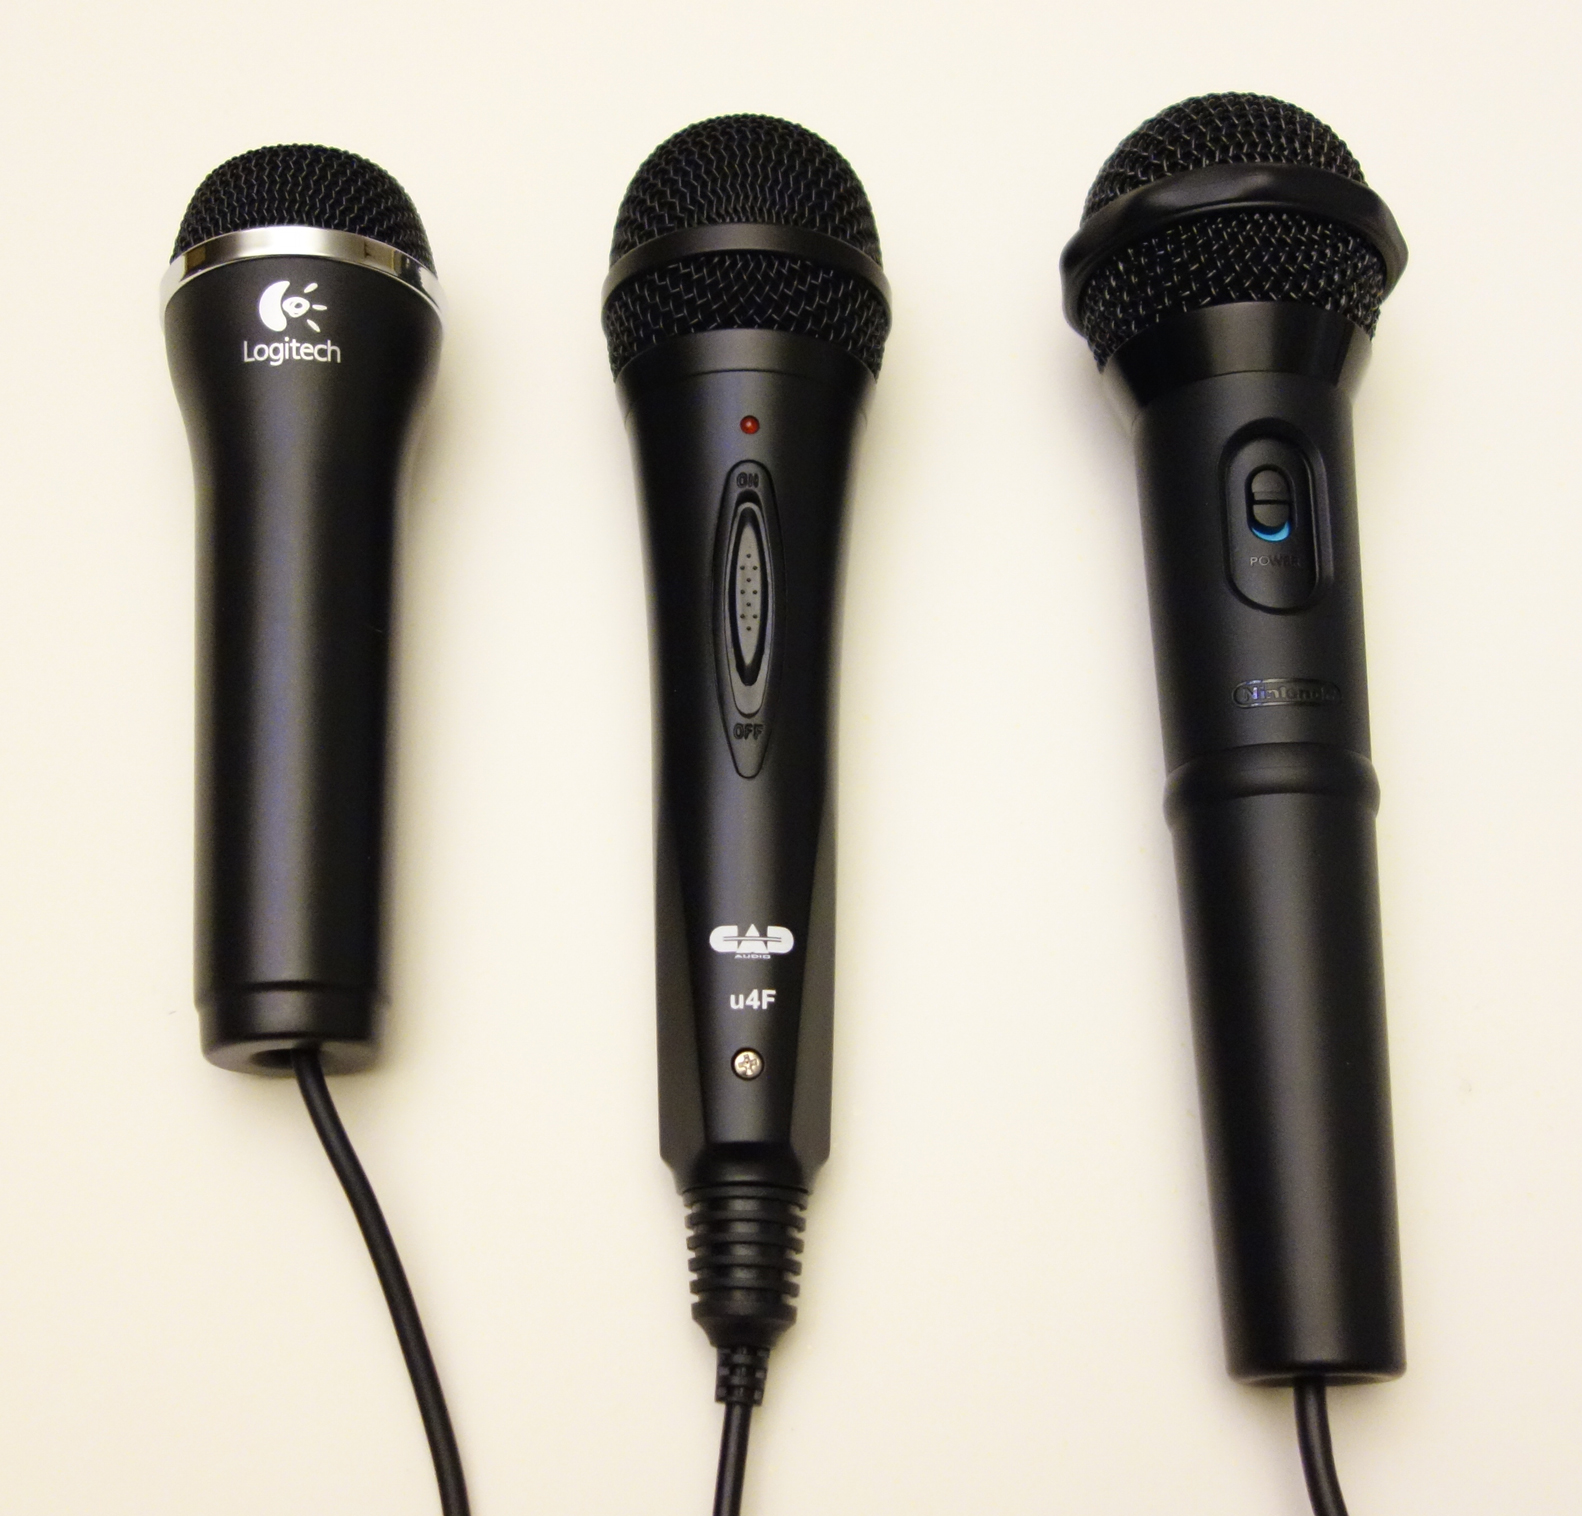 microphones compatible with xbox one